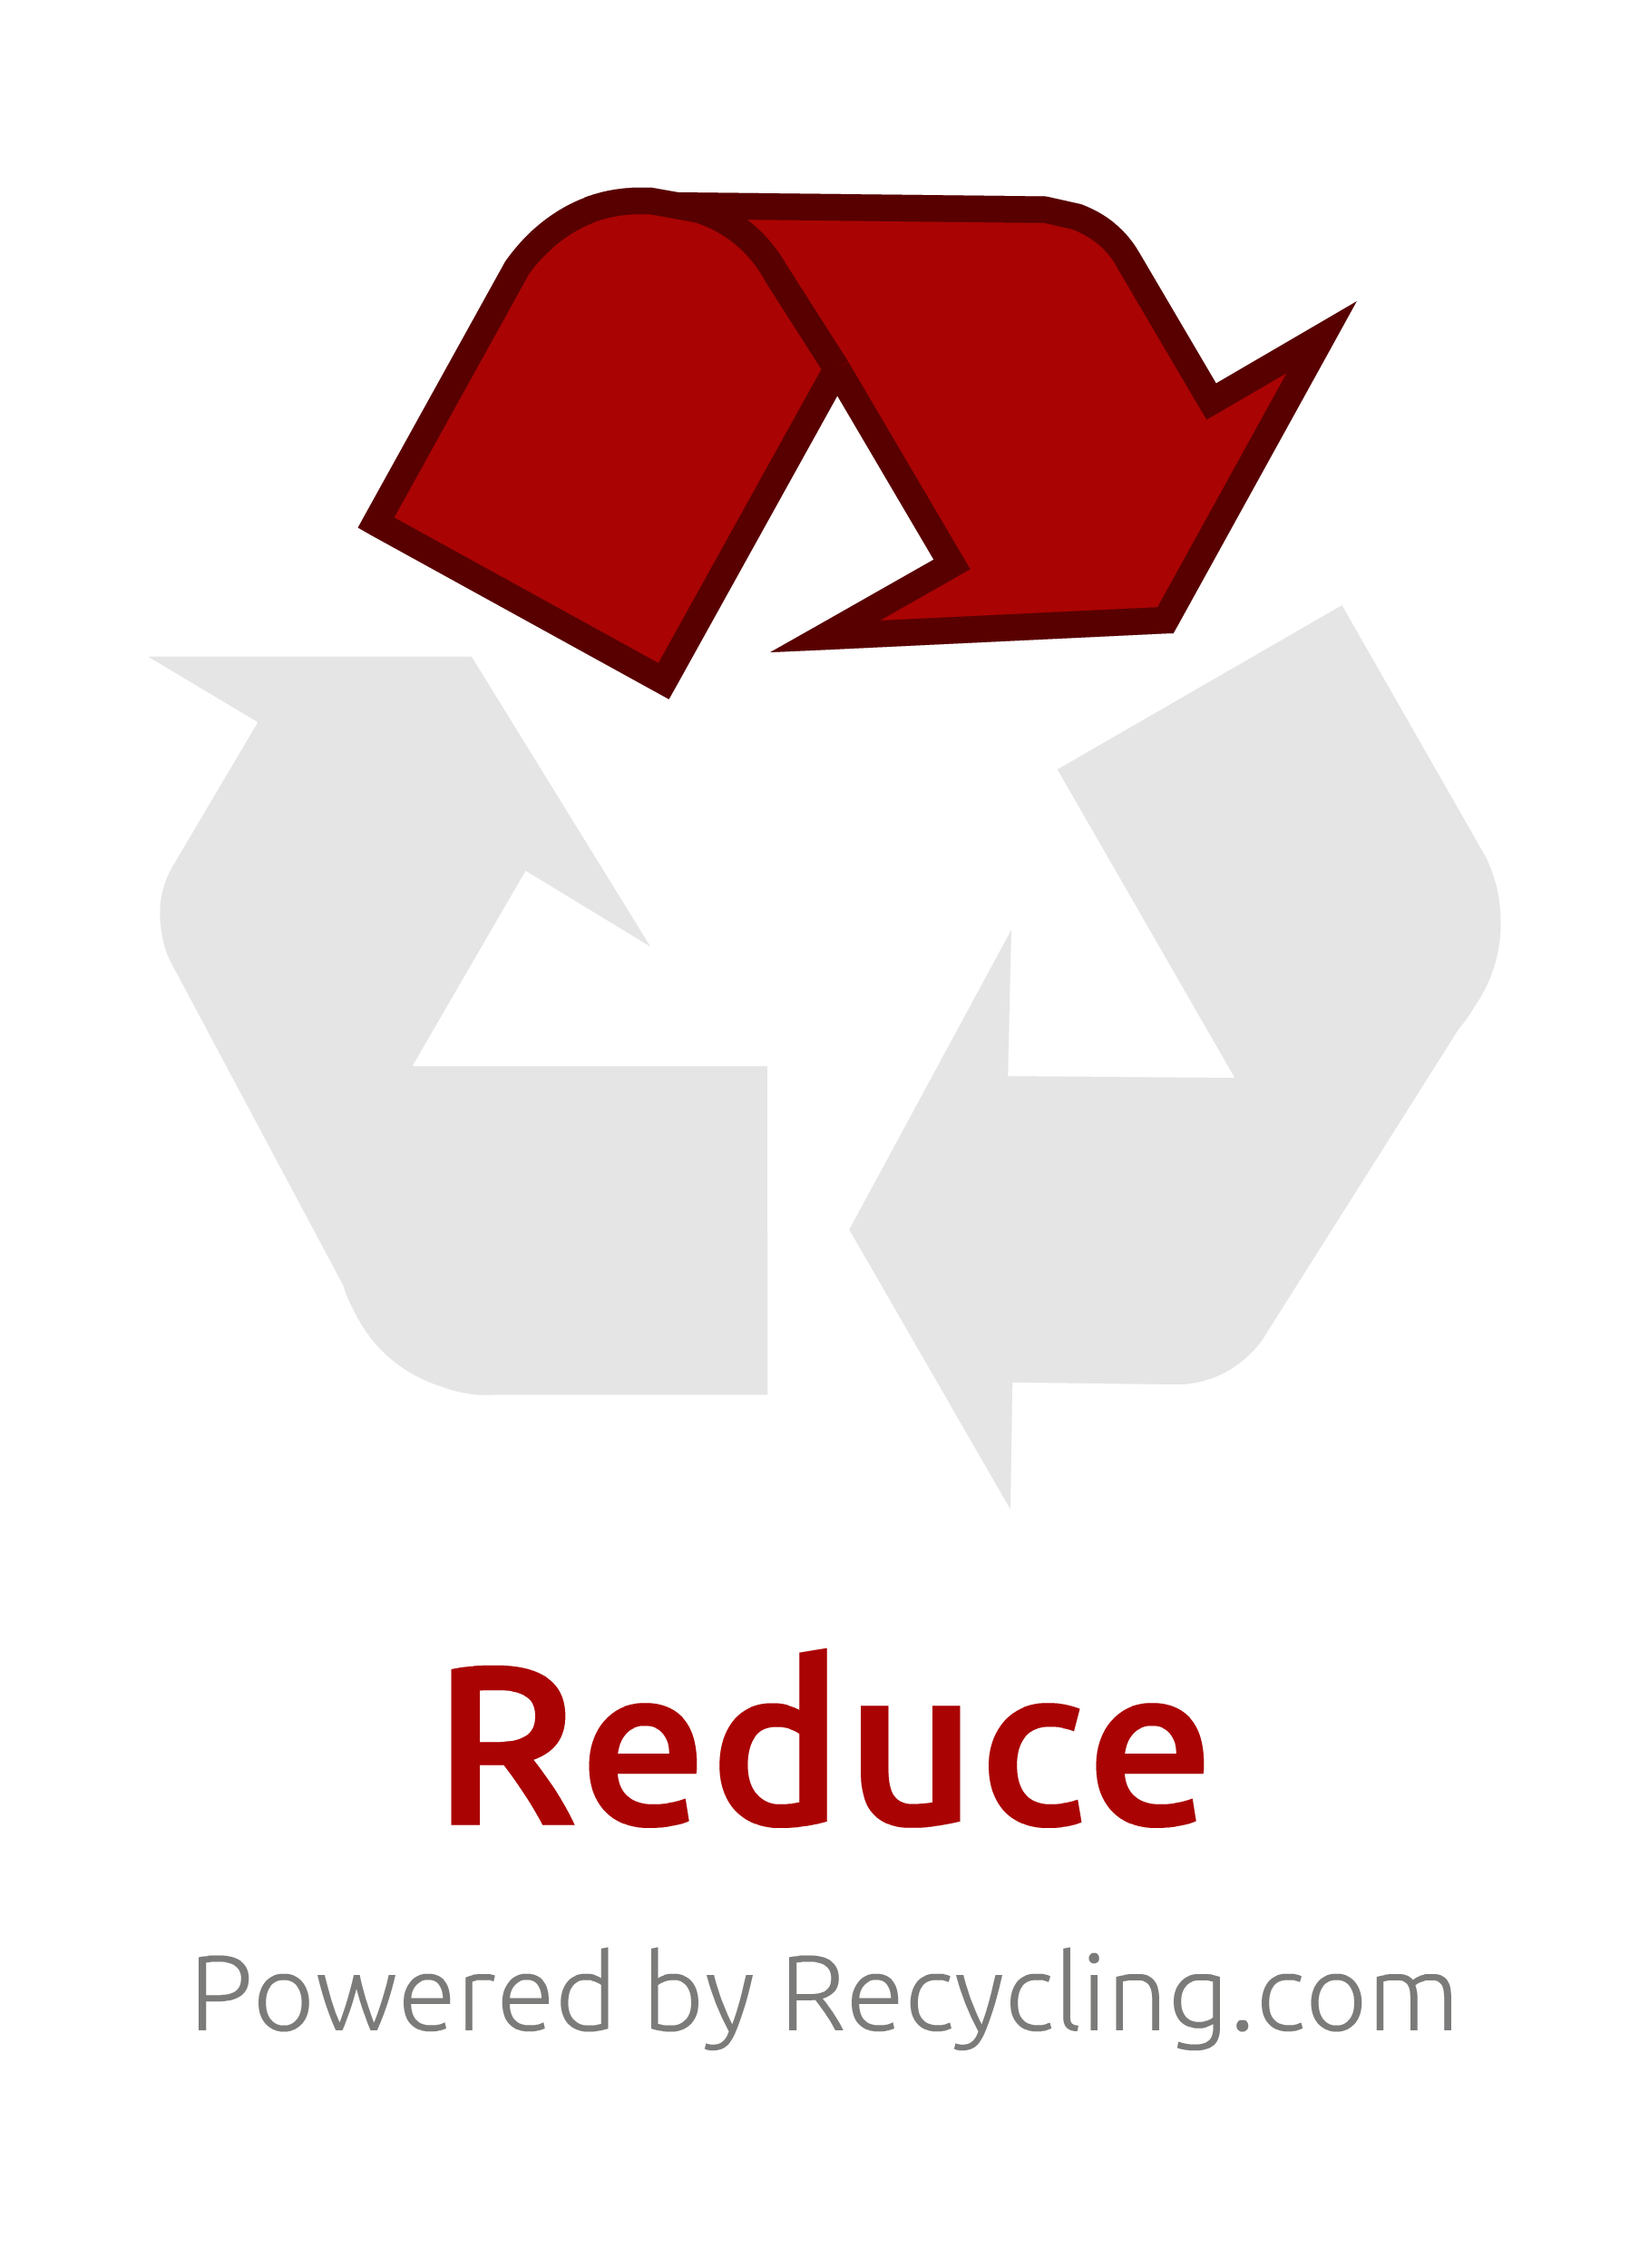 Trilogy Logo - The Recycling Trilogy, Reuse, Recycle